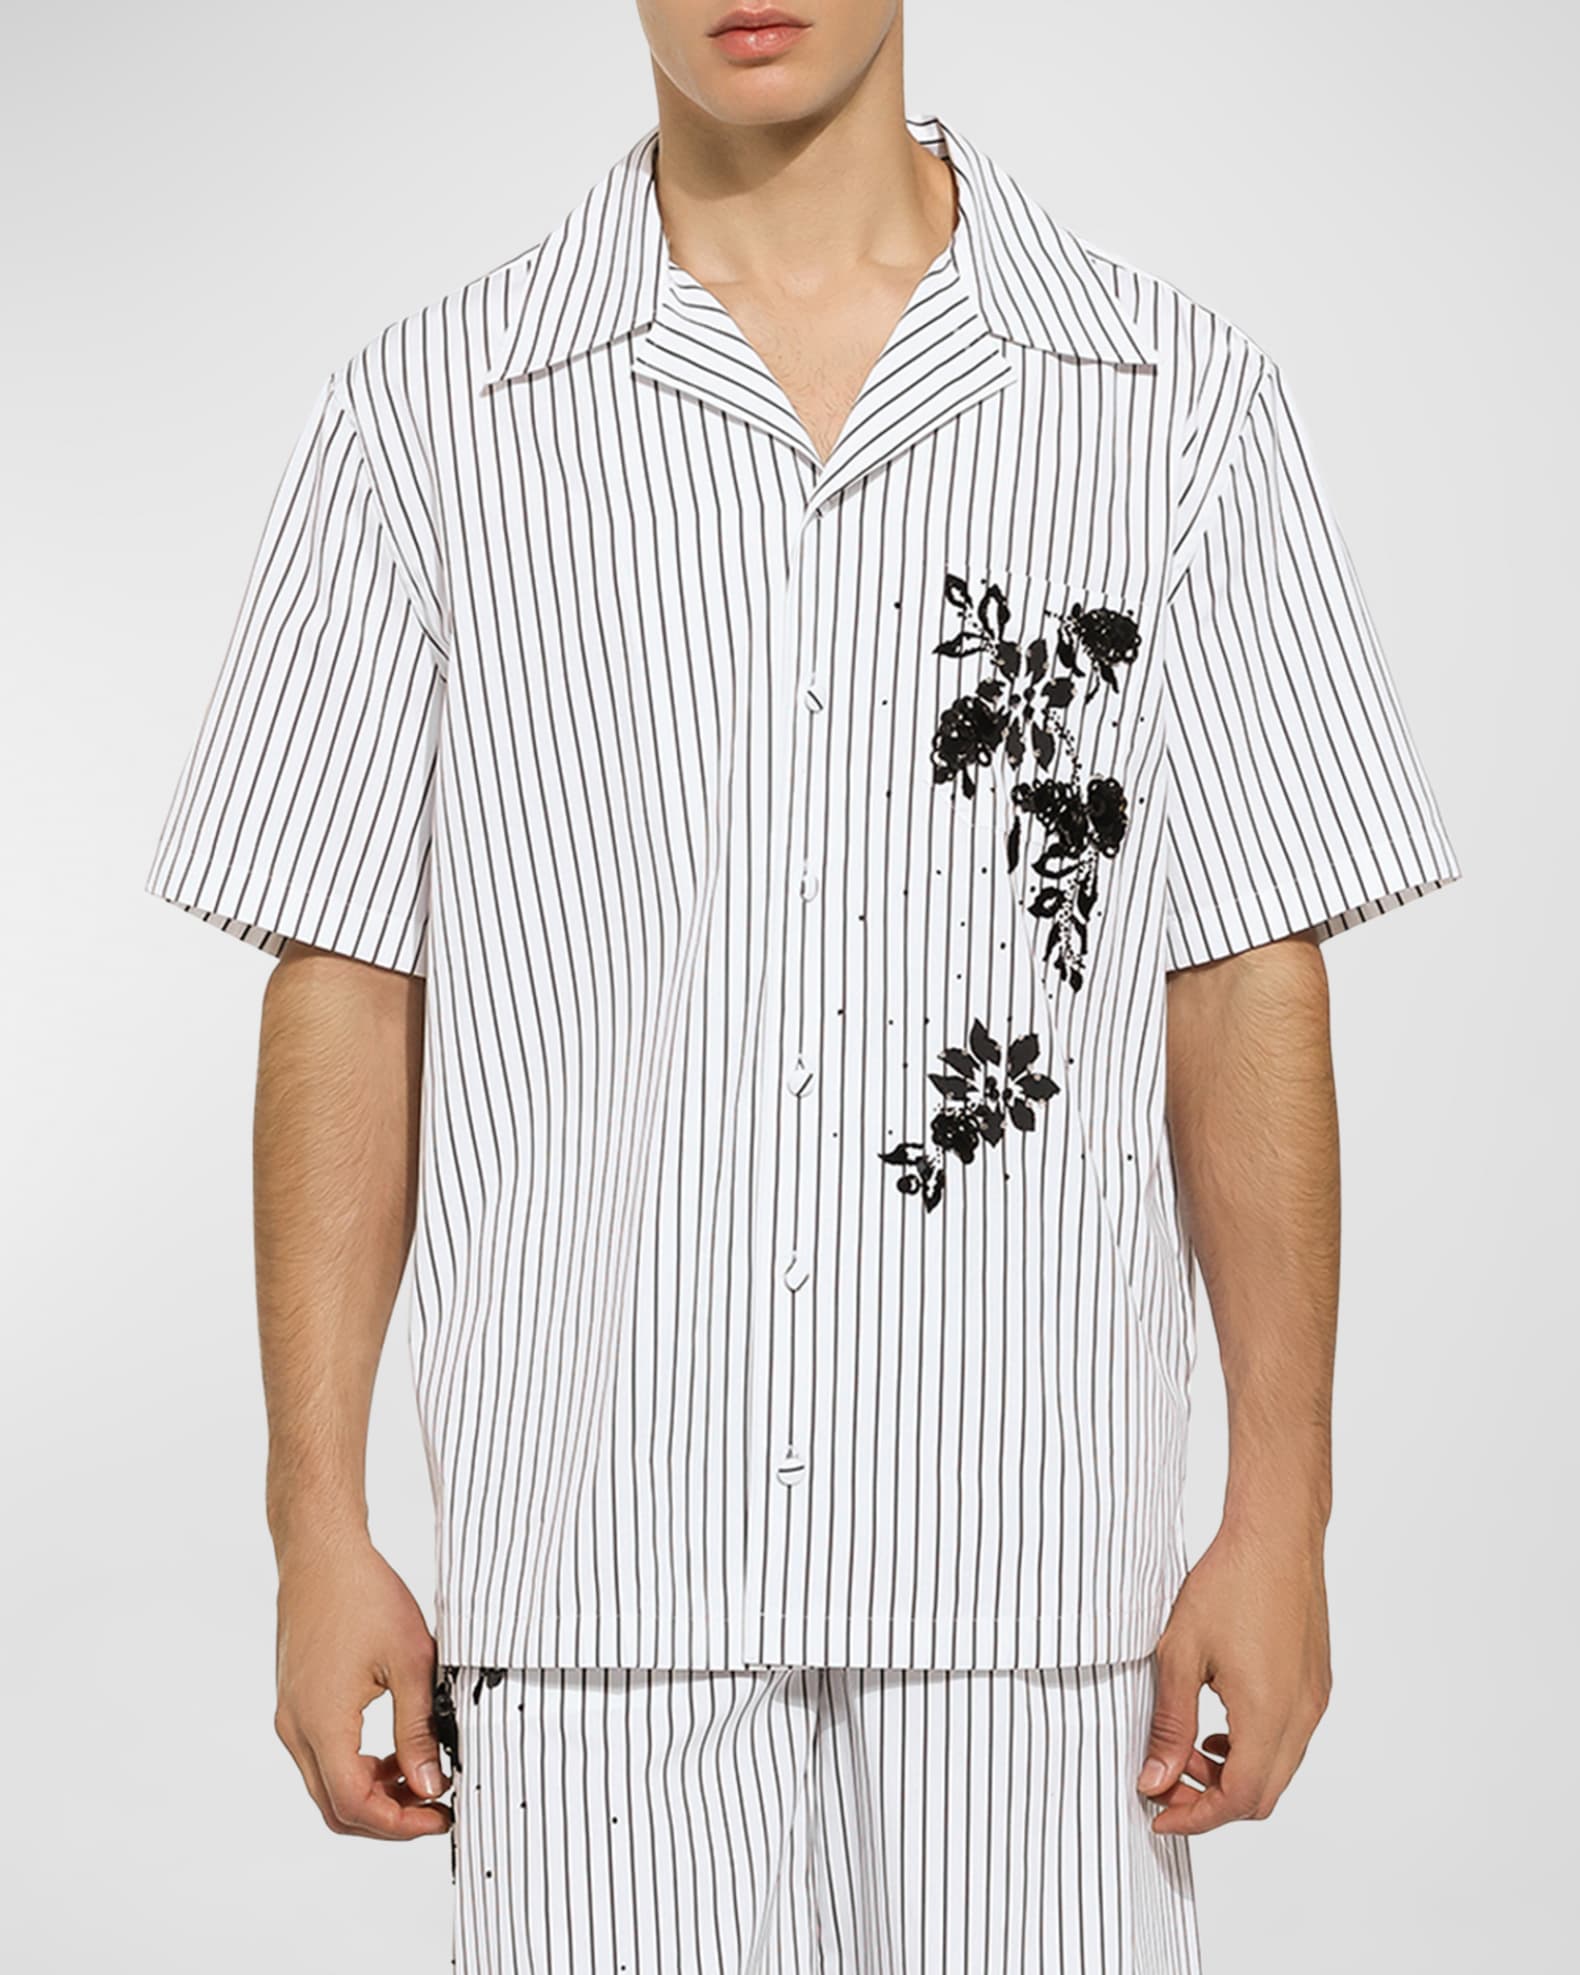 Dolce&Gabbana Men's Striped Floral Embroidery Camp Shirt | Neiman Marcus